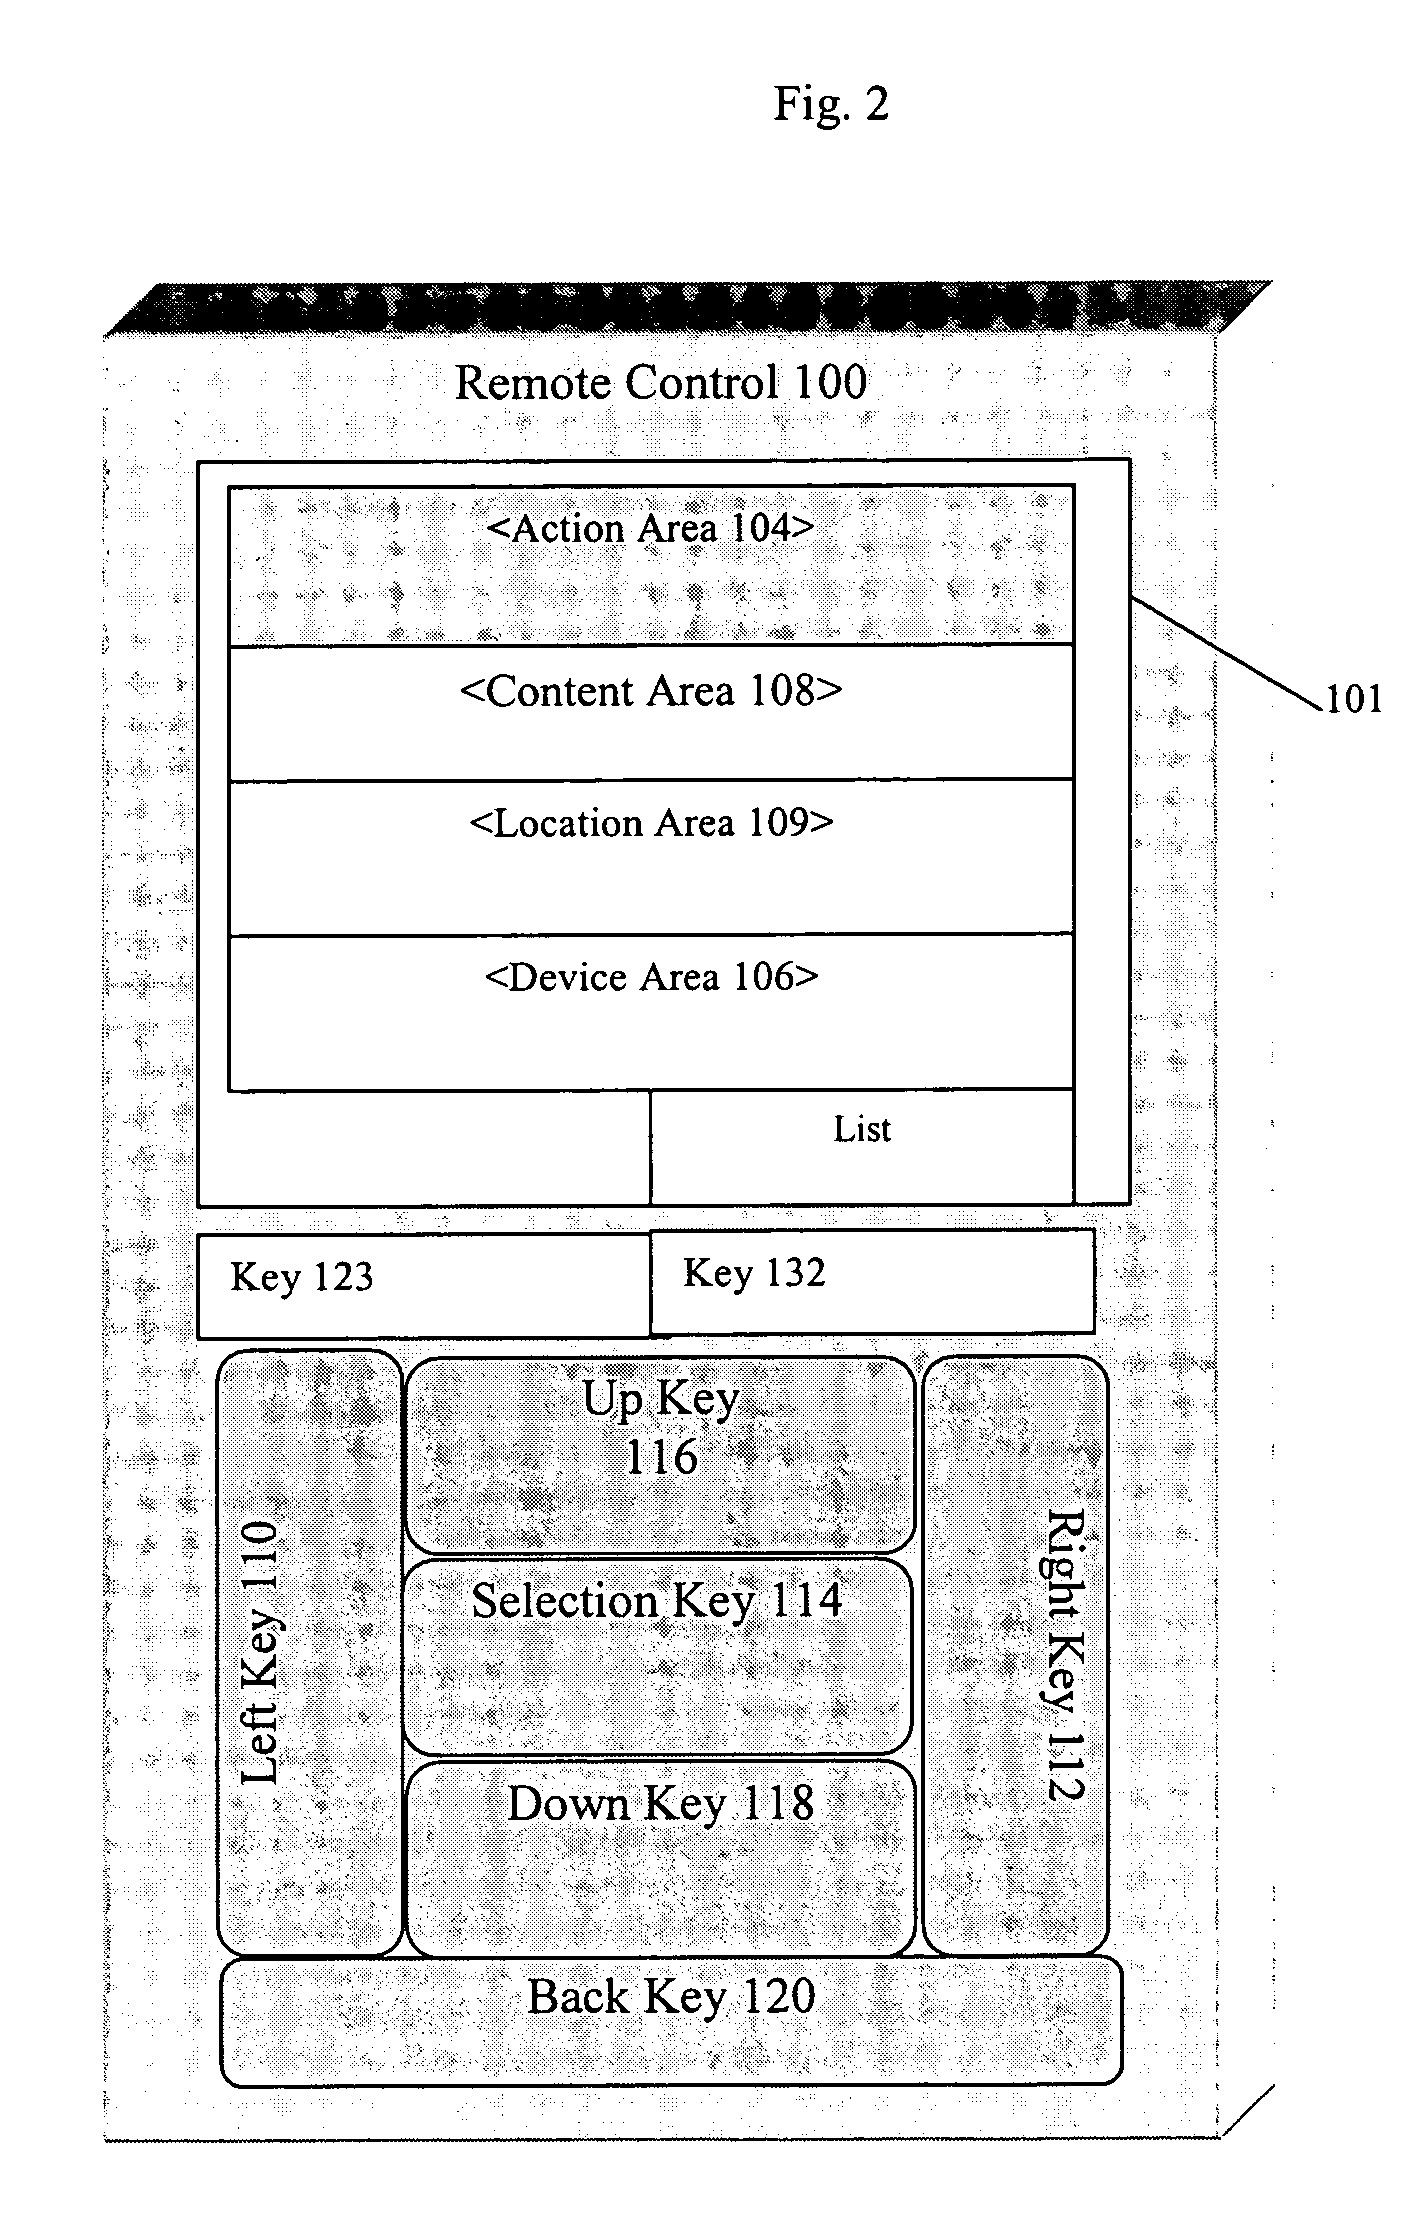 Method of task-oriented universal remote control user interface